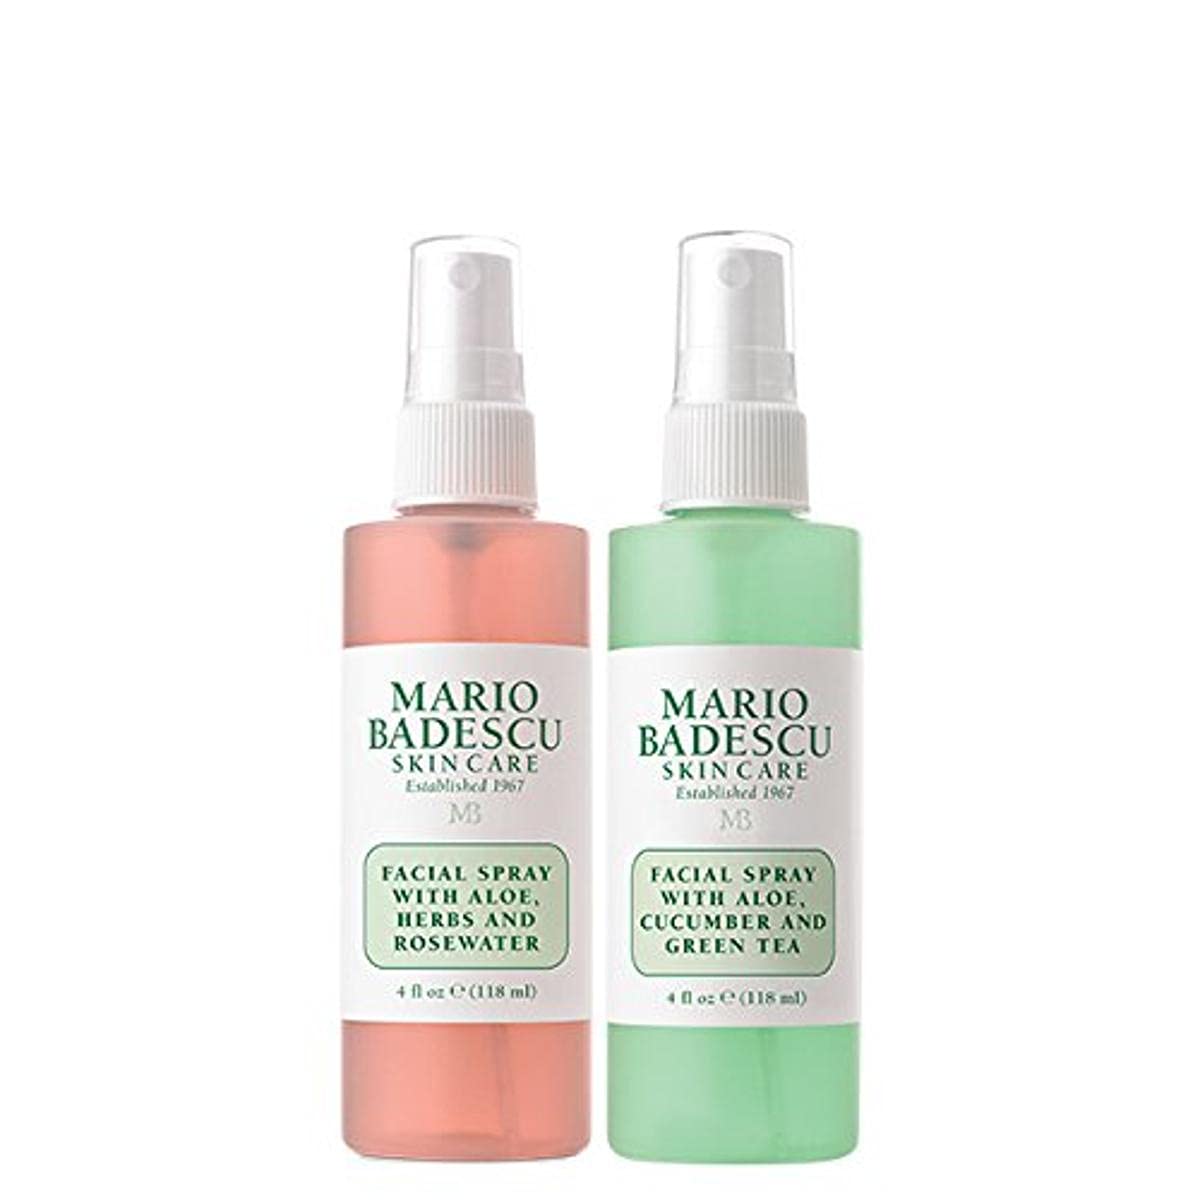 Mario Badescu Facial Spray Aloe, Rose Water and Cucumber - Green Tea Duo for Face, Neck or Hair, Cooling and Hydrating Face Mist for All Skin Types, Dewy Finish